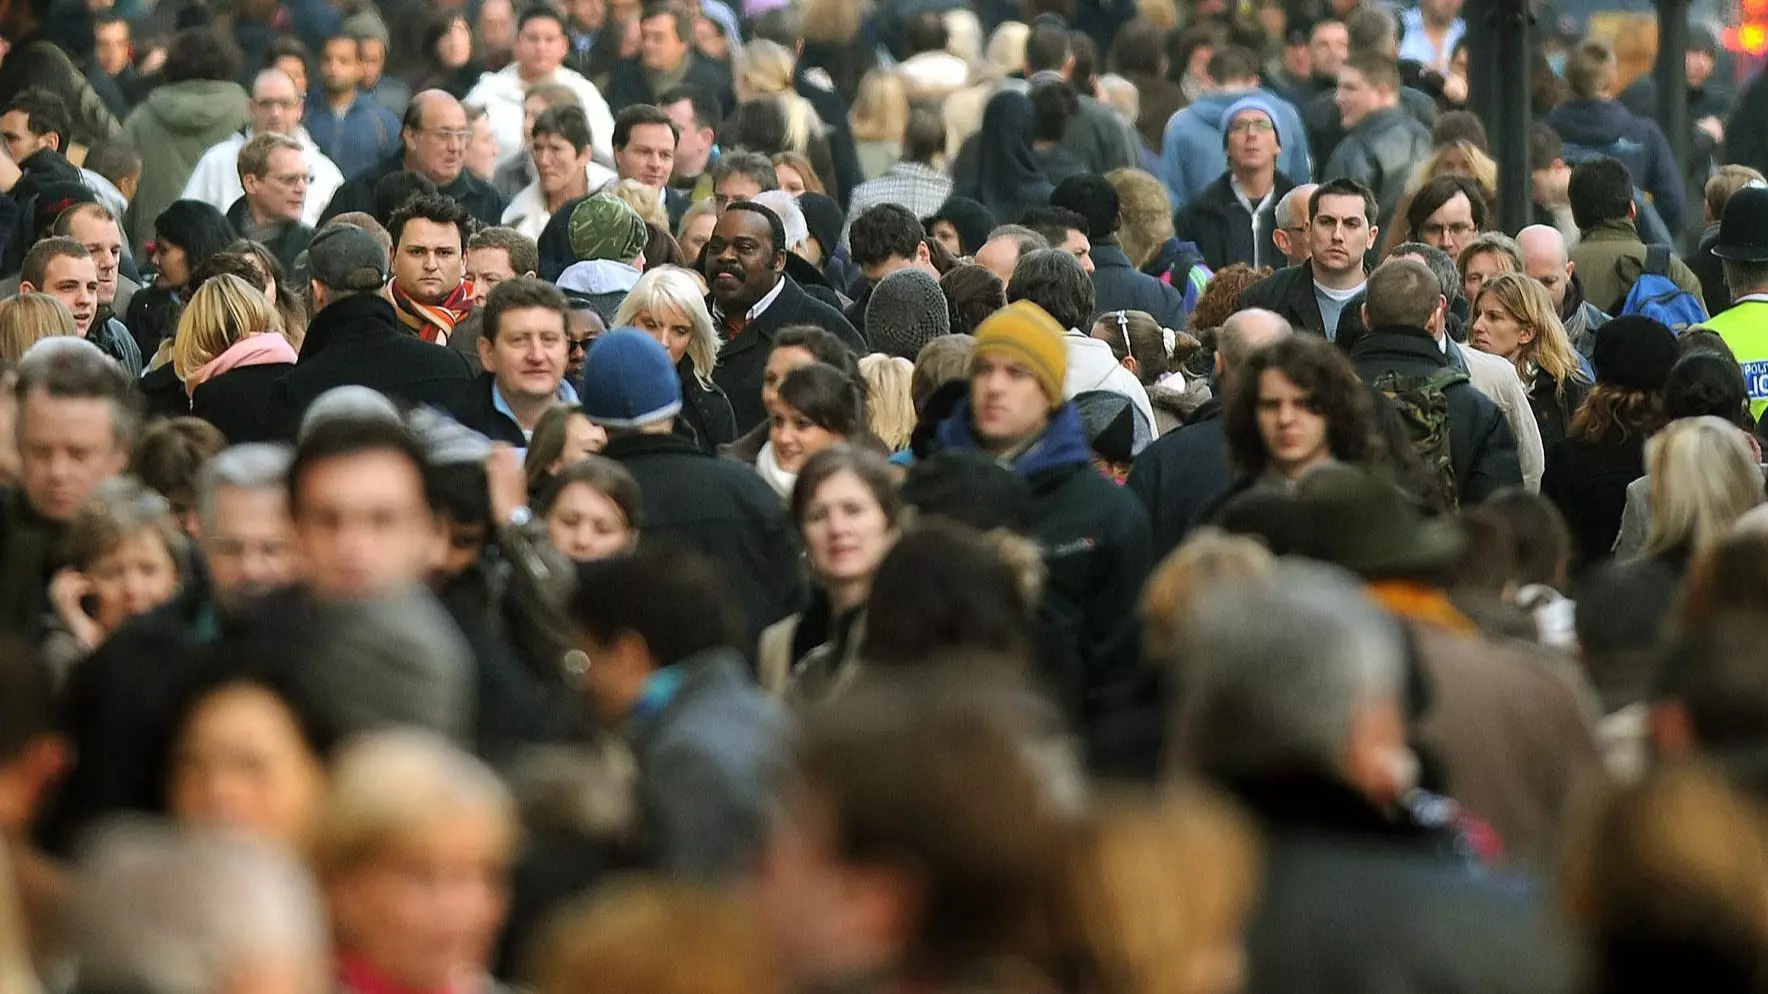 For The First Time In Centuries The World's Population Will Decline Over The Next Few Decades